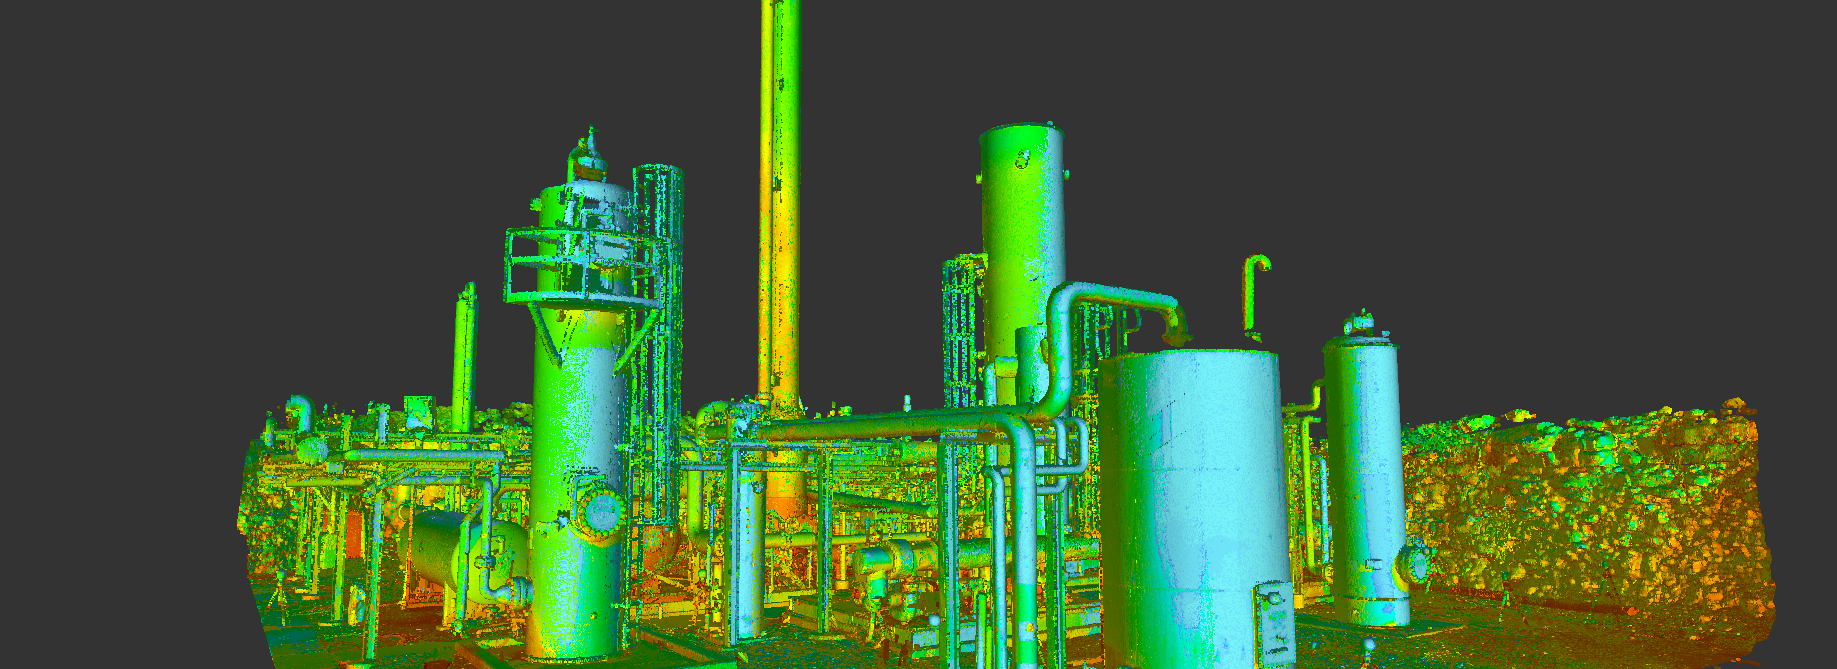 Point Cloud Scanning